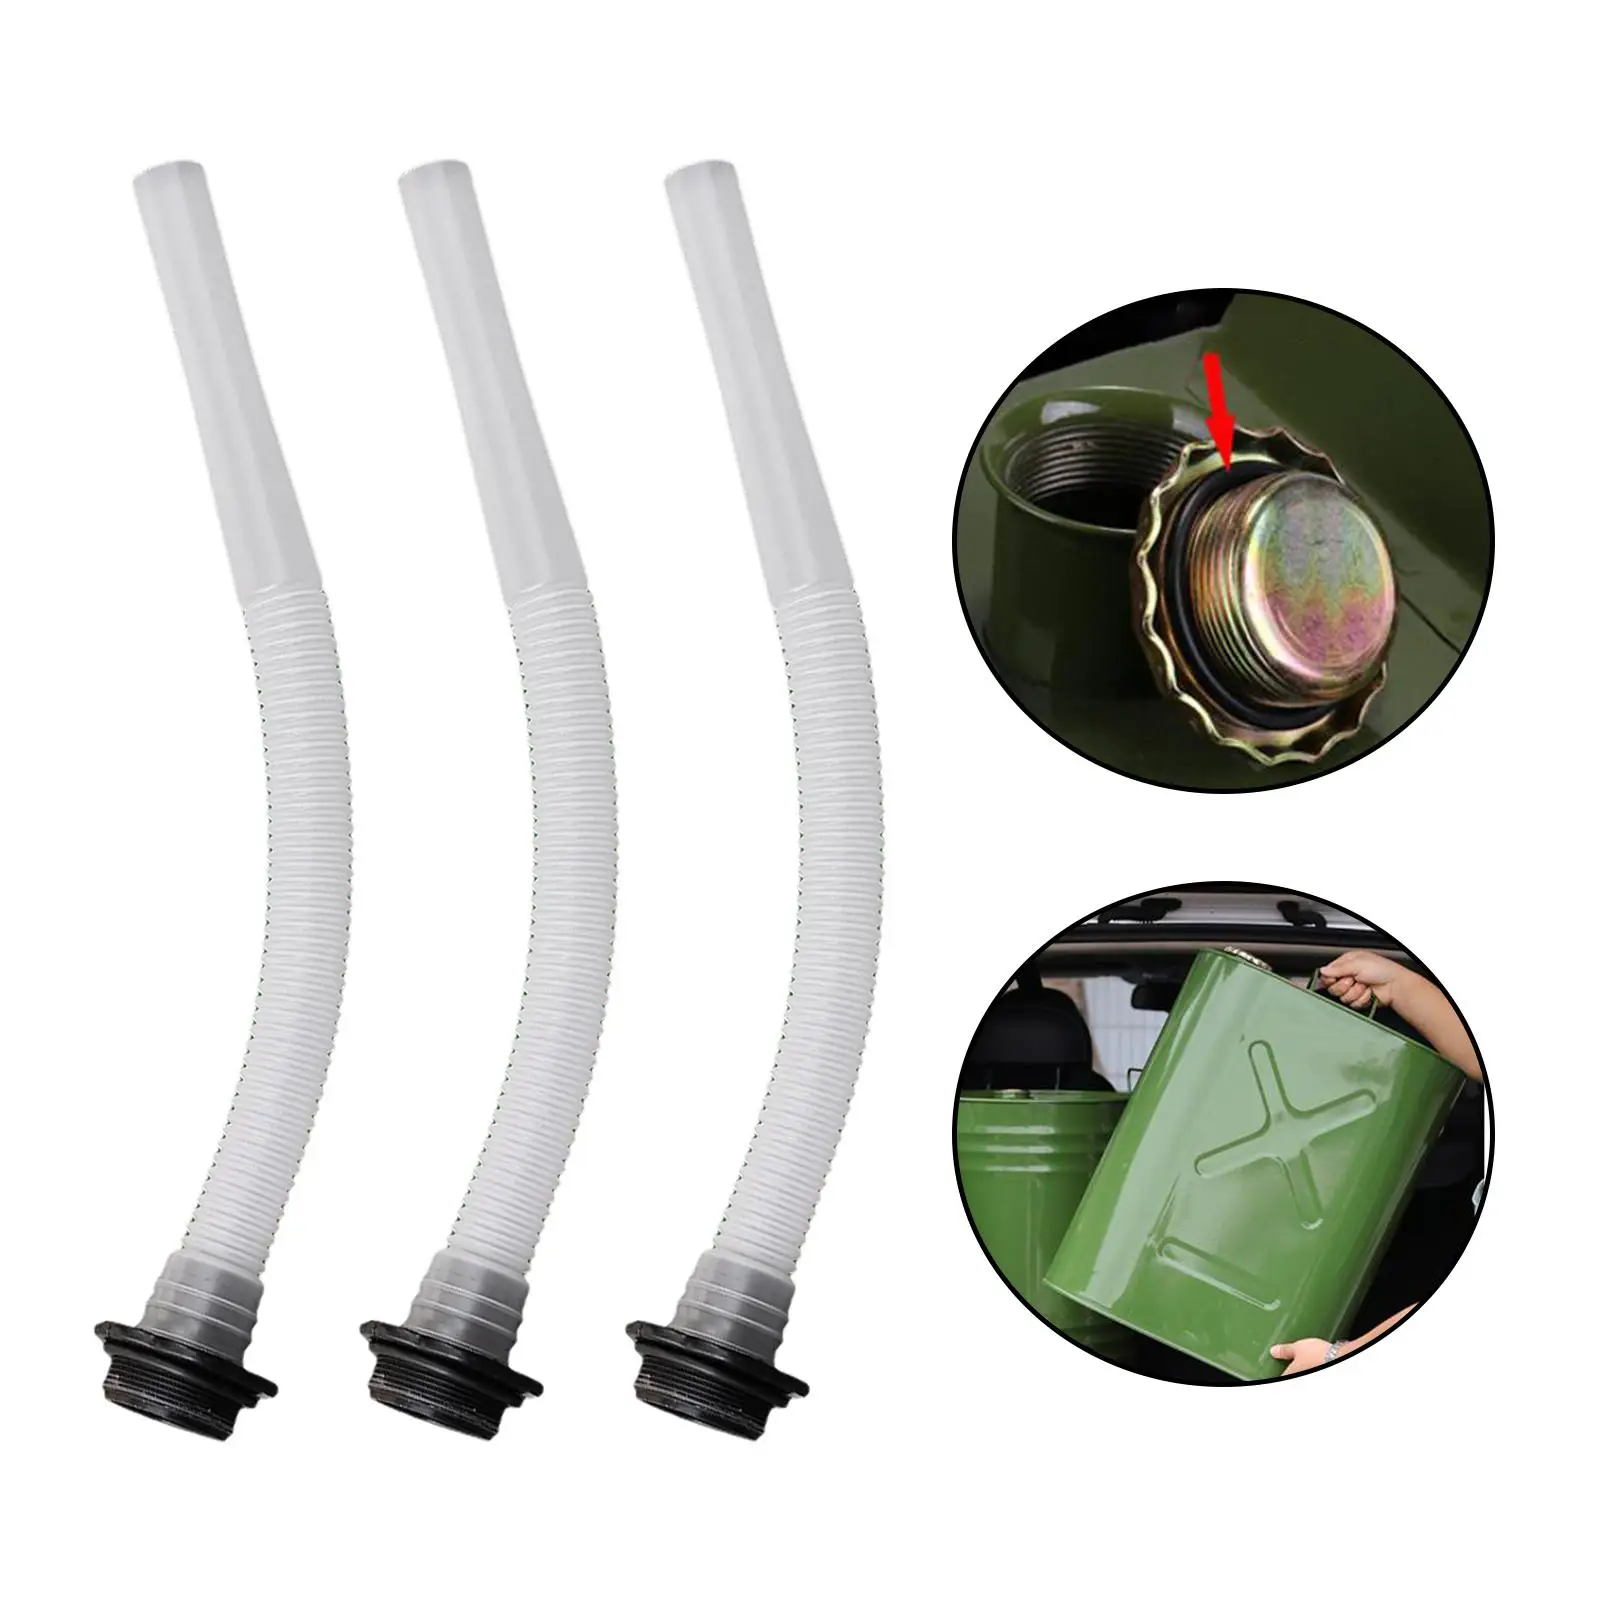 3Pcs 34cm Length Fuel Tank Pouring Nozzle Replacement Nozzles Canister Motorcycle Accessories Sealing Petrol Cans Flexible Tube